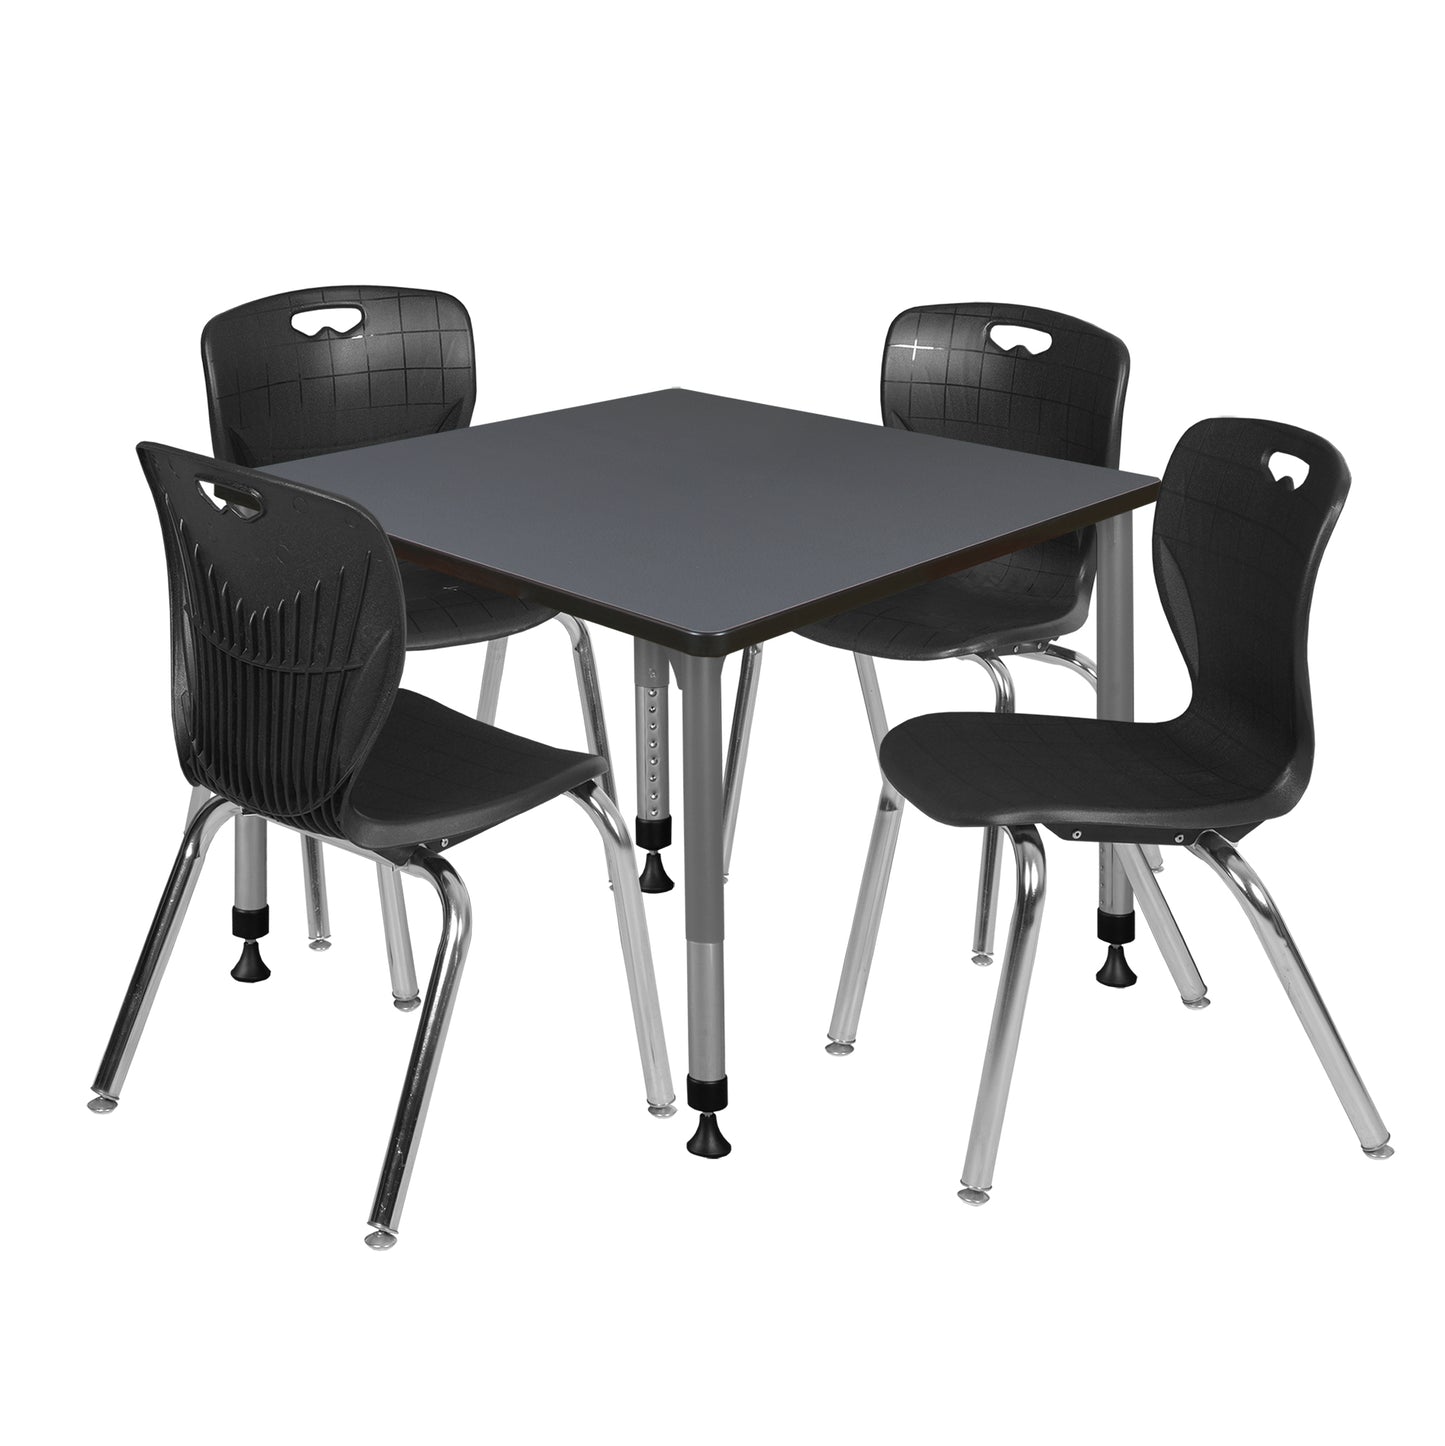 Regency Kee 42 in. Square Adjustable Classroom Table & 4 Andy 18 in. Stack Chairs